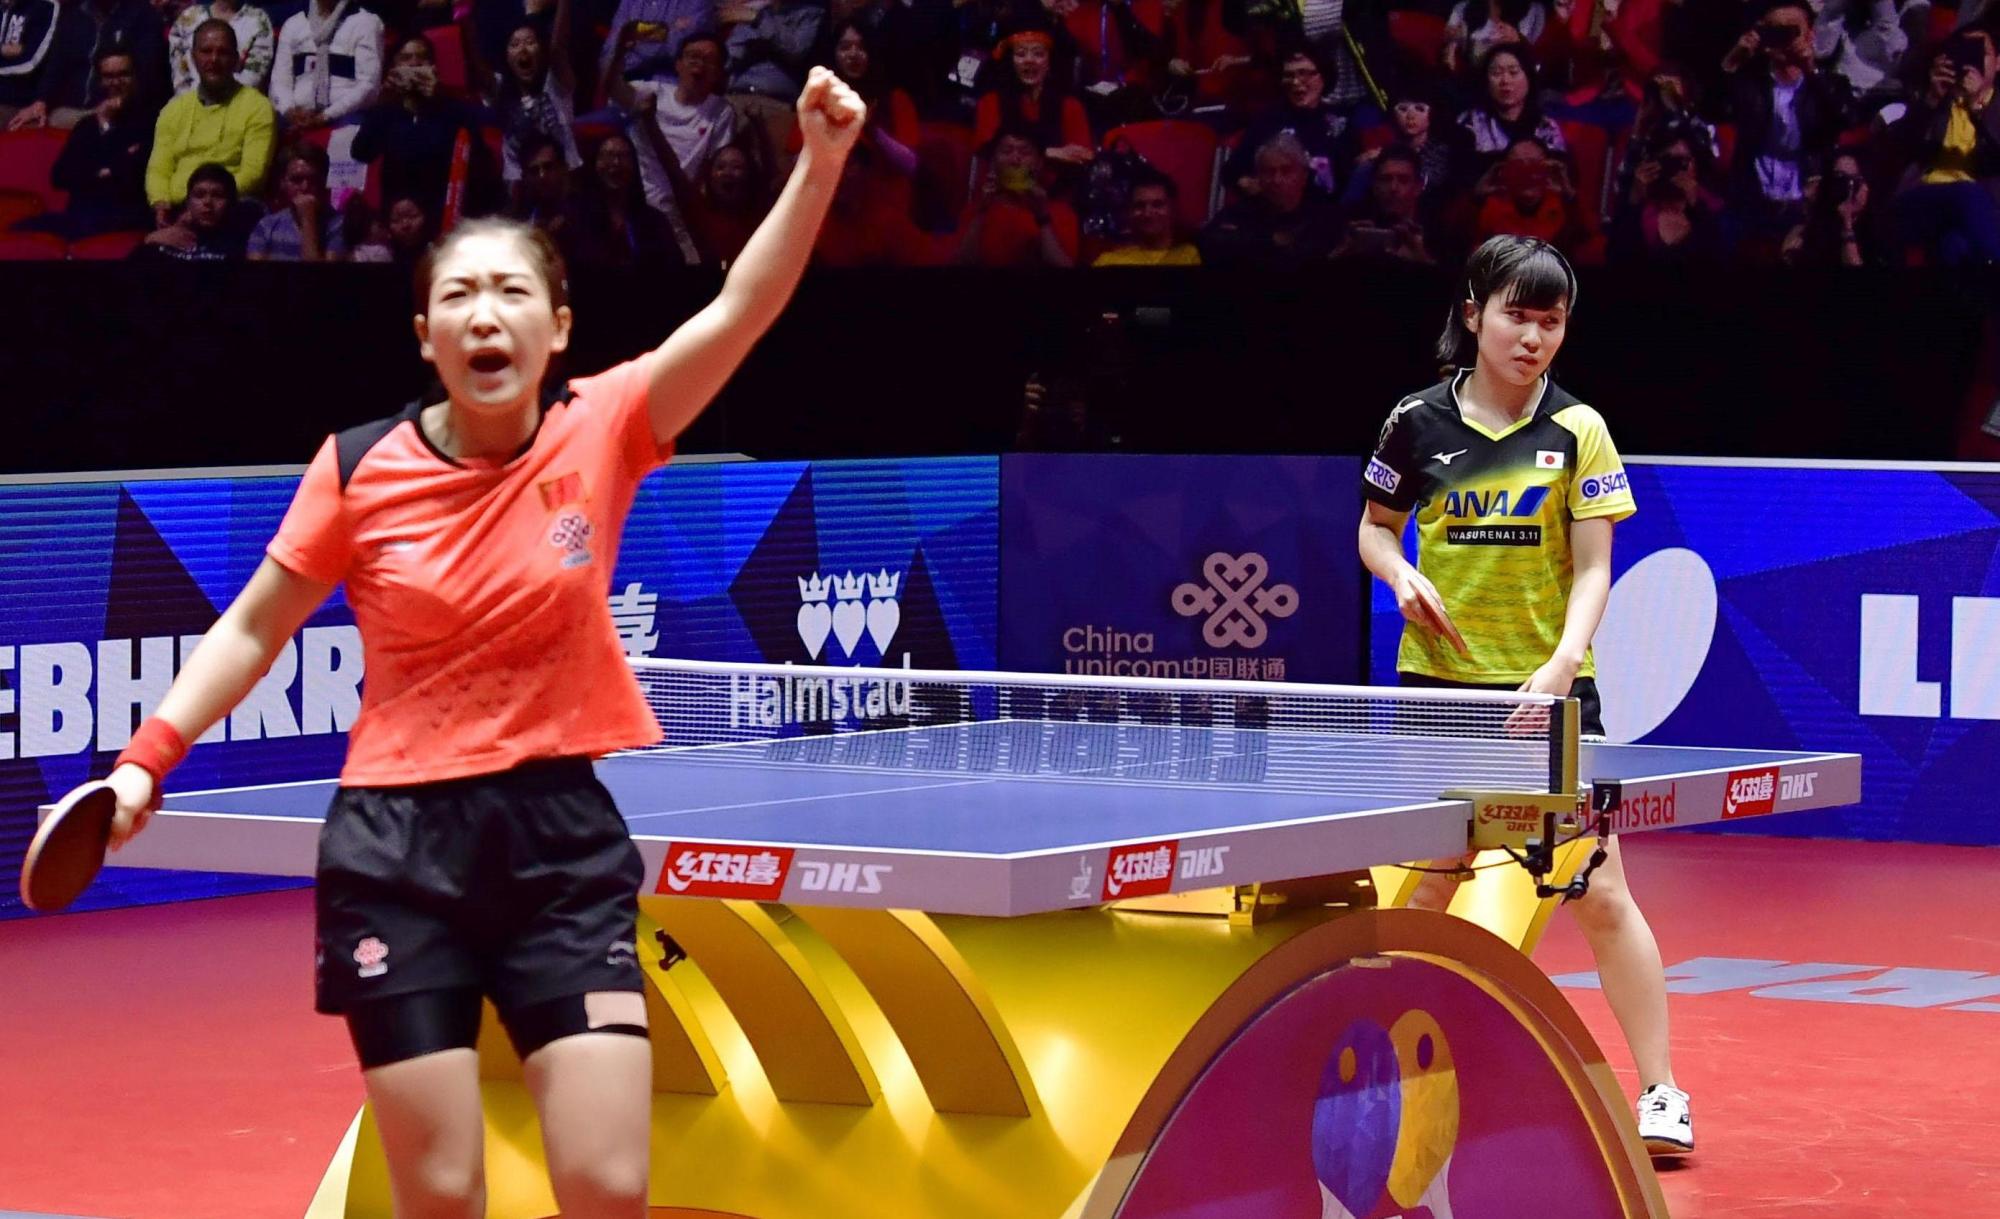 Japan falls to China in World Team Table Tennis Championships womens final 